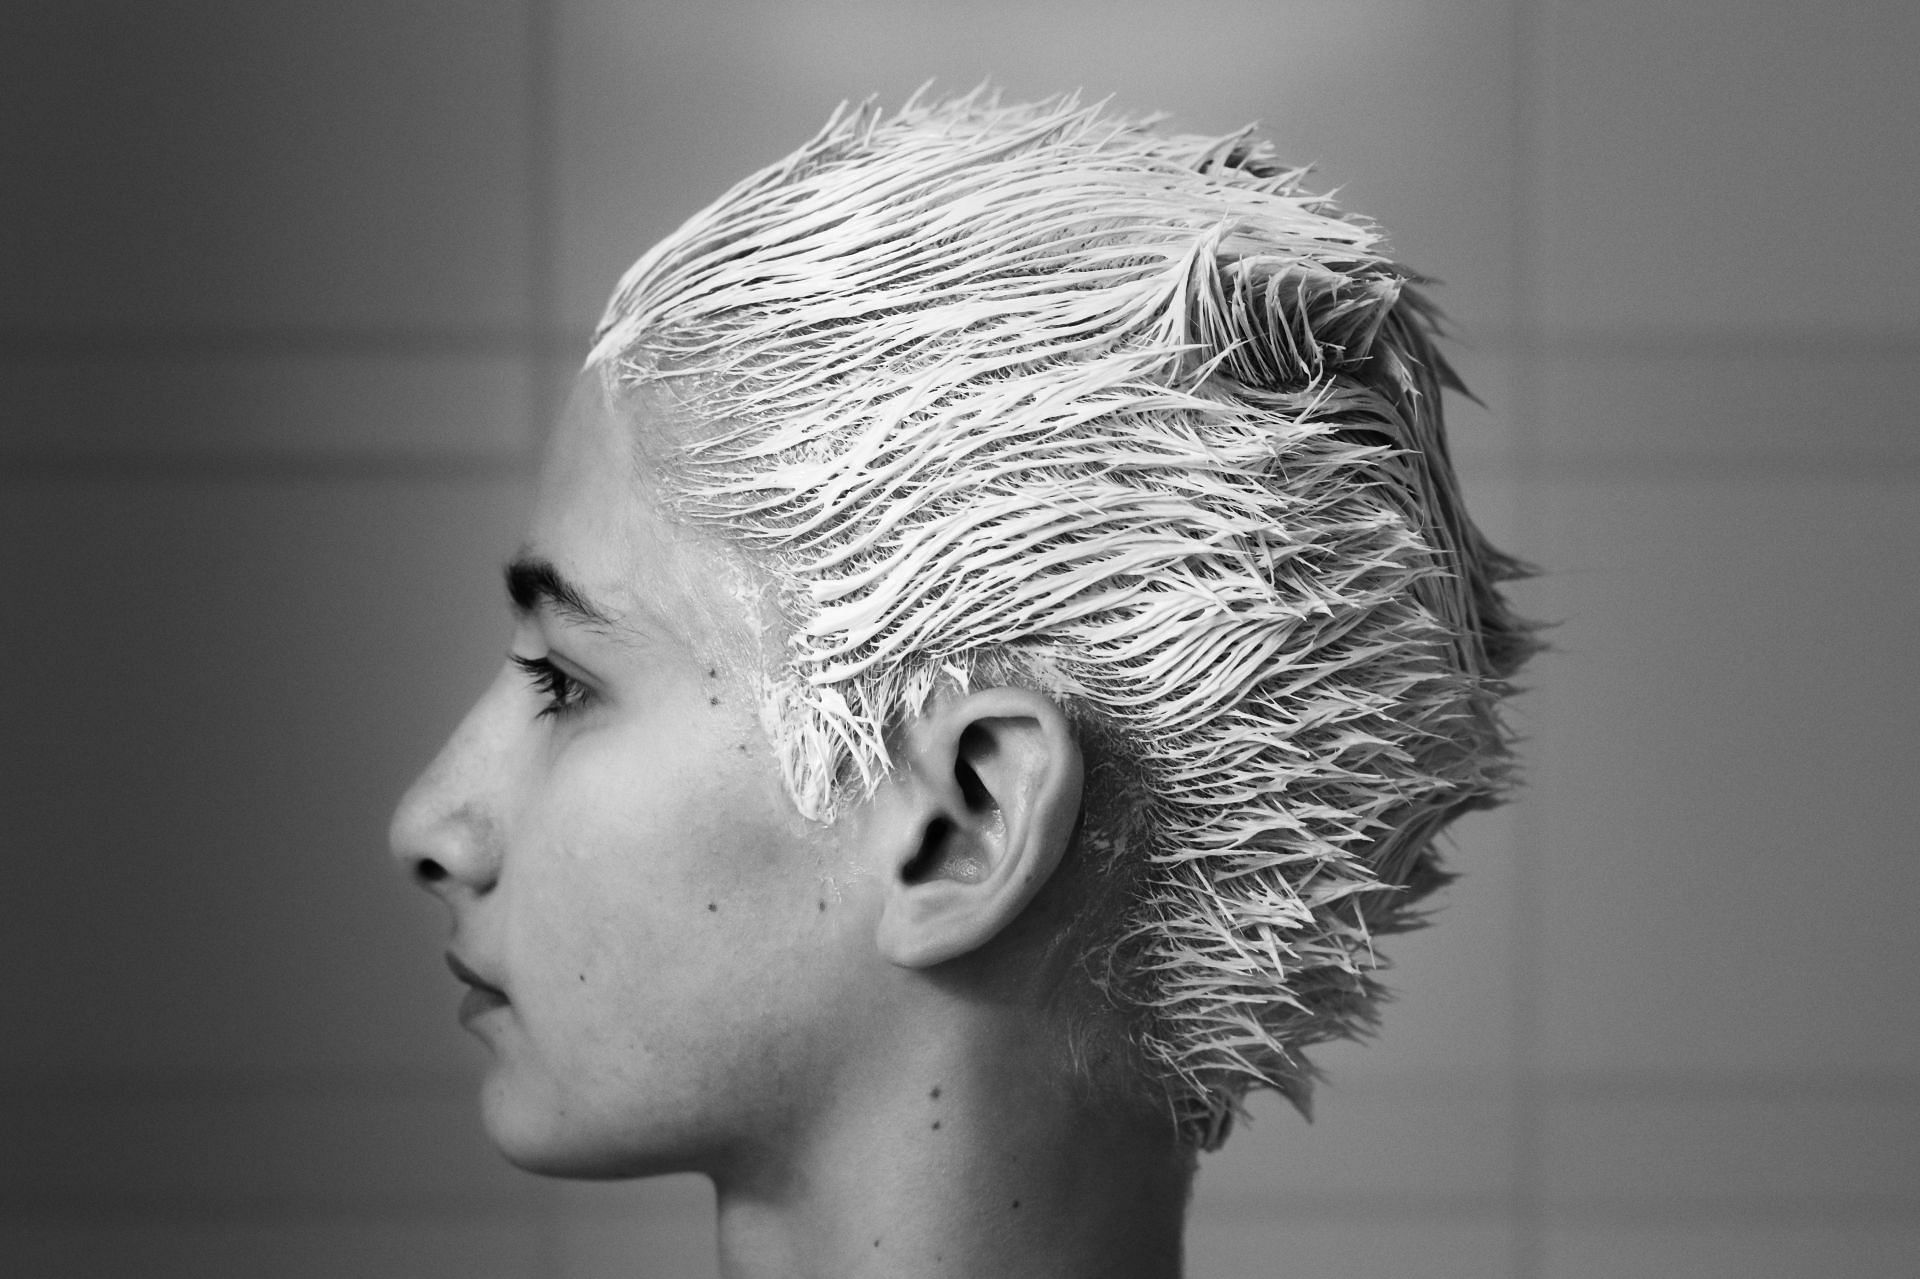 Using styling products like wax and gel can lead to oily and greasy hair. (Image via Unsplash/Greg Rosenke)